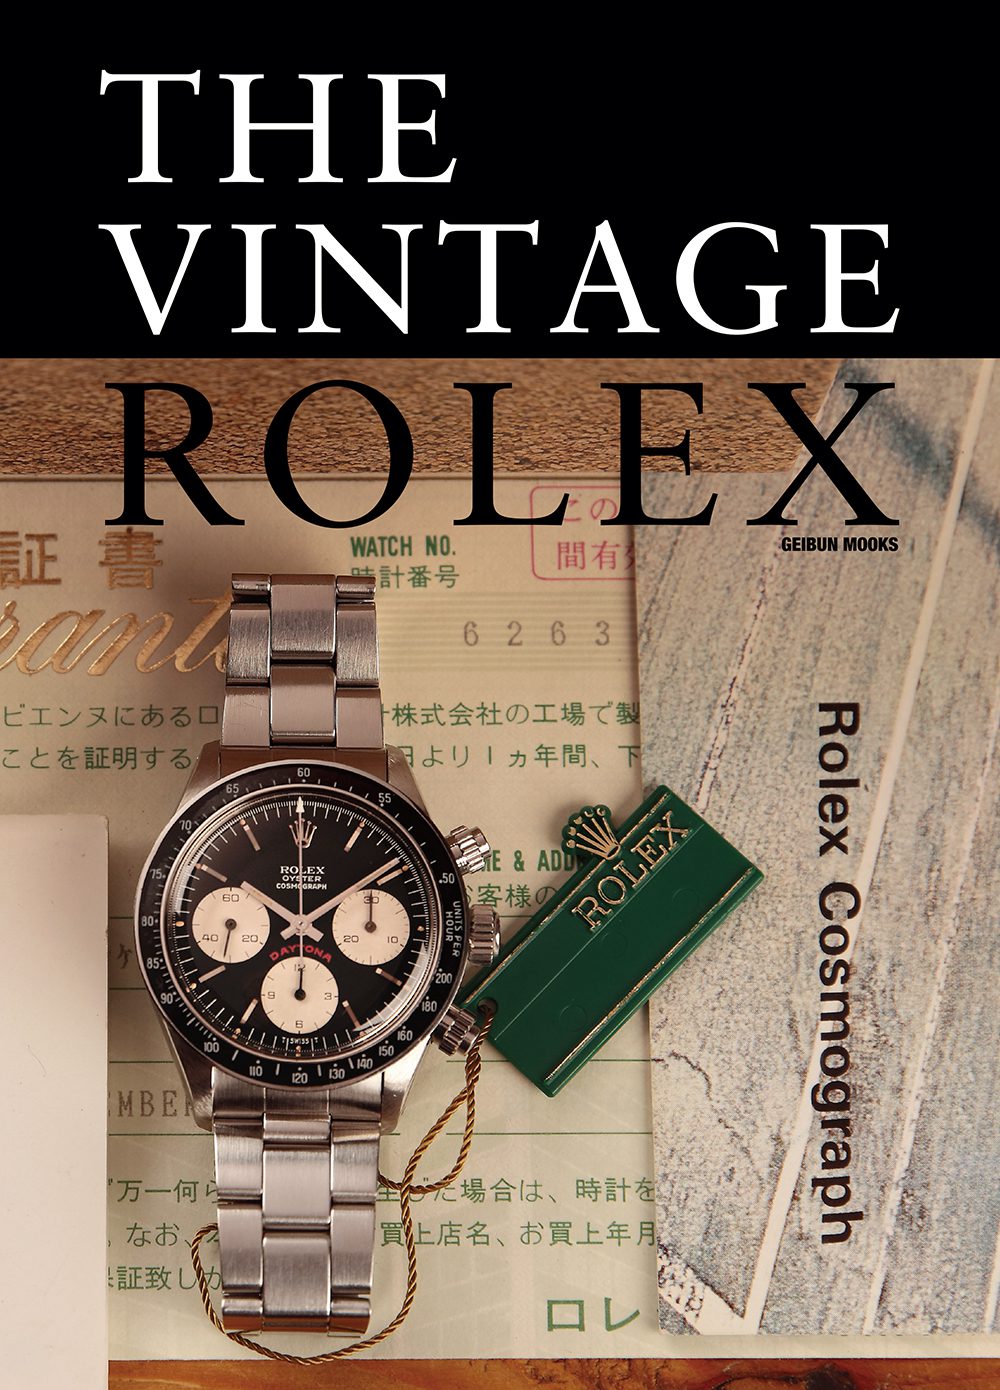 THE VINTAGE ROLEX | 芸文社カタログサイト